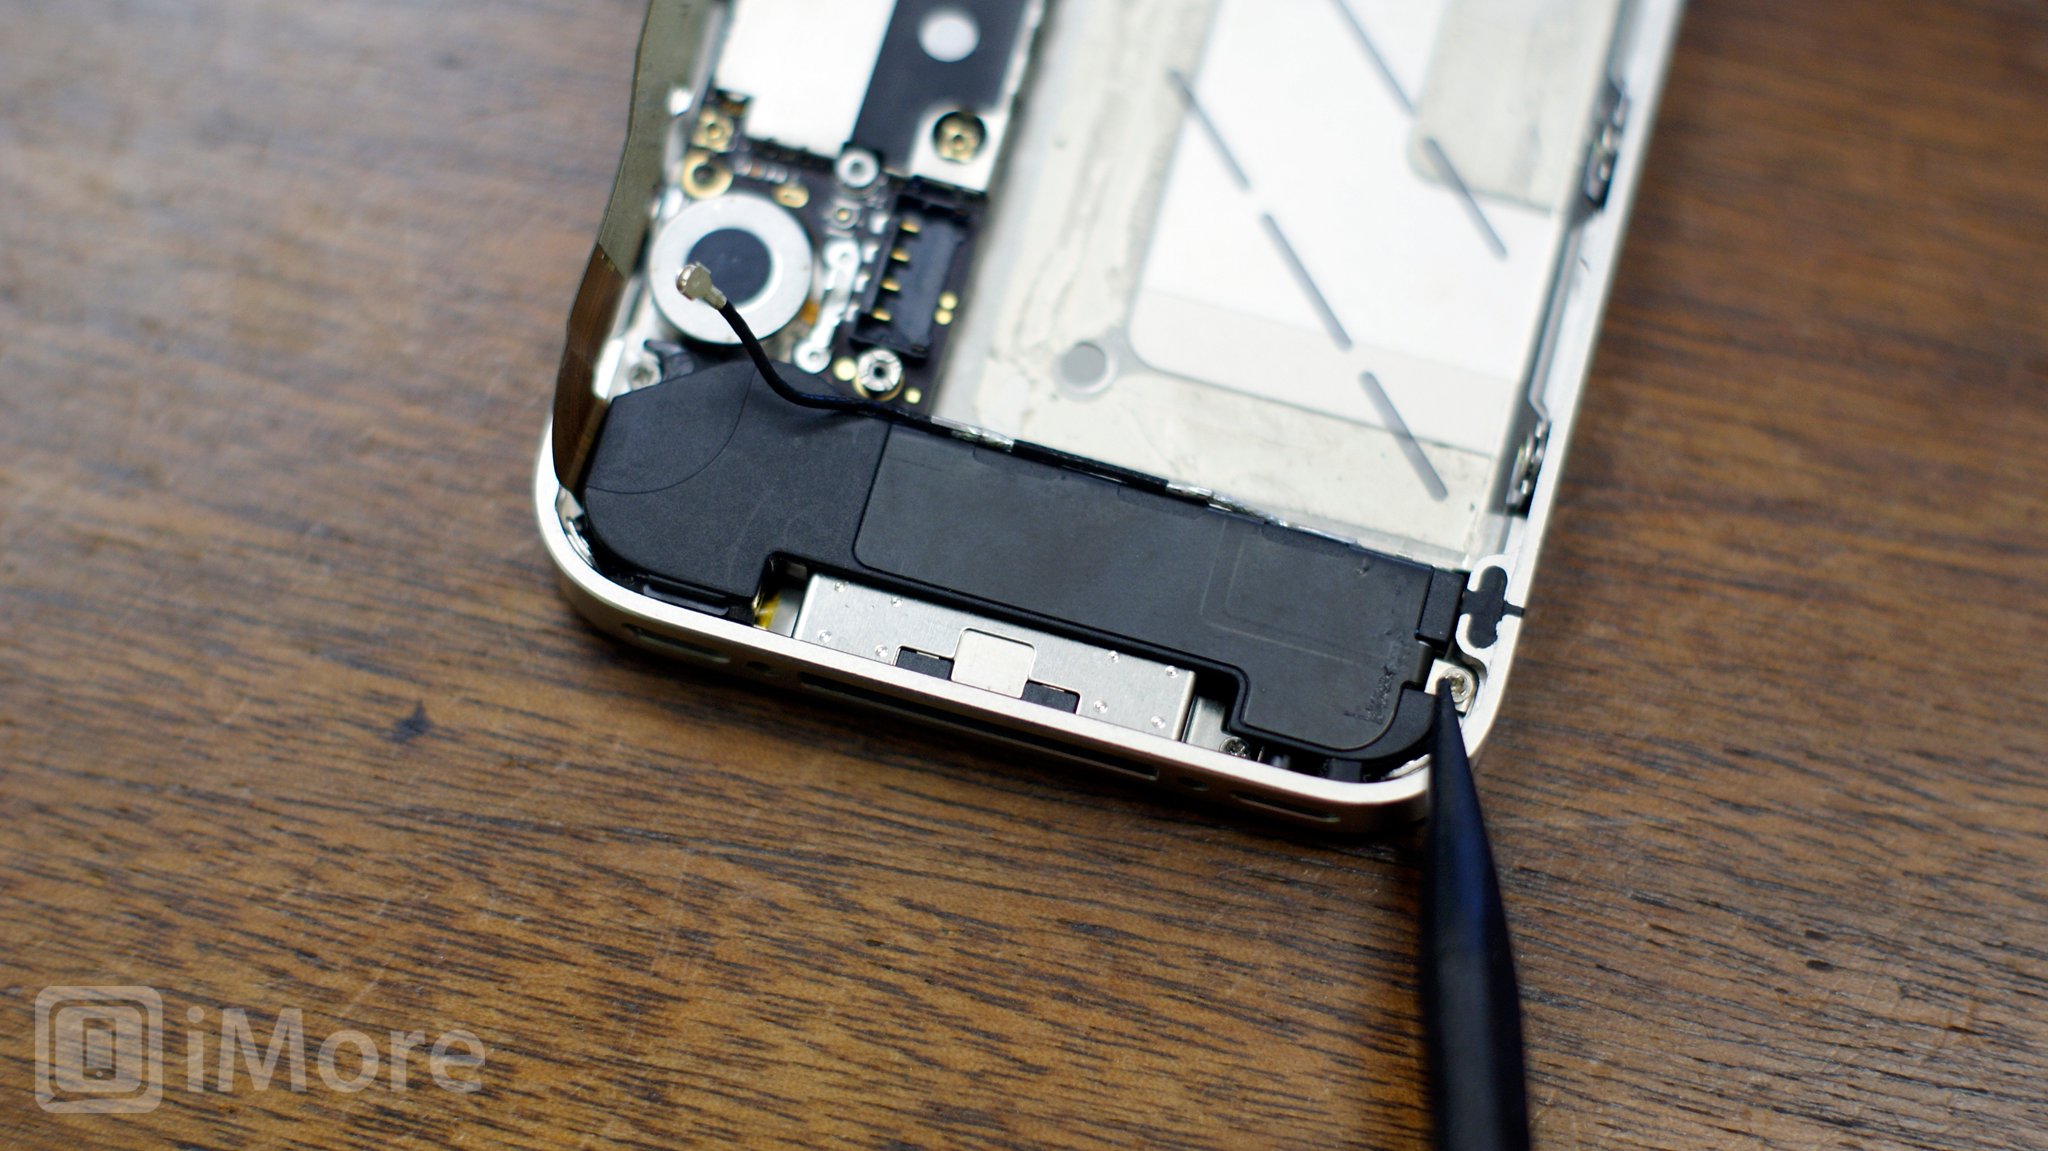 Remove the 2 screws holding down iPhone 4 speaker assembly